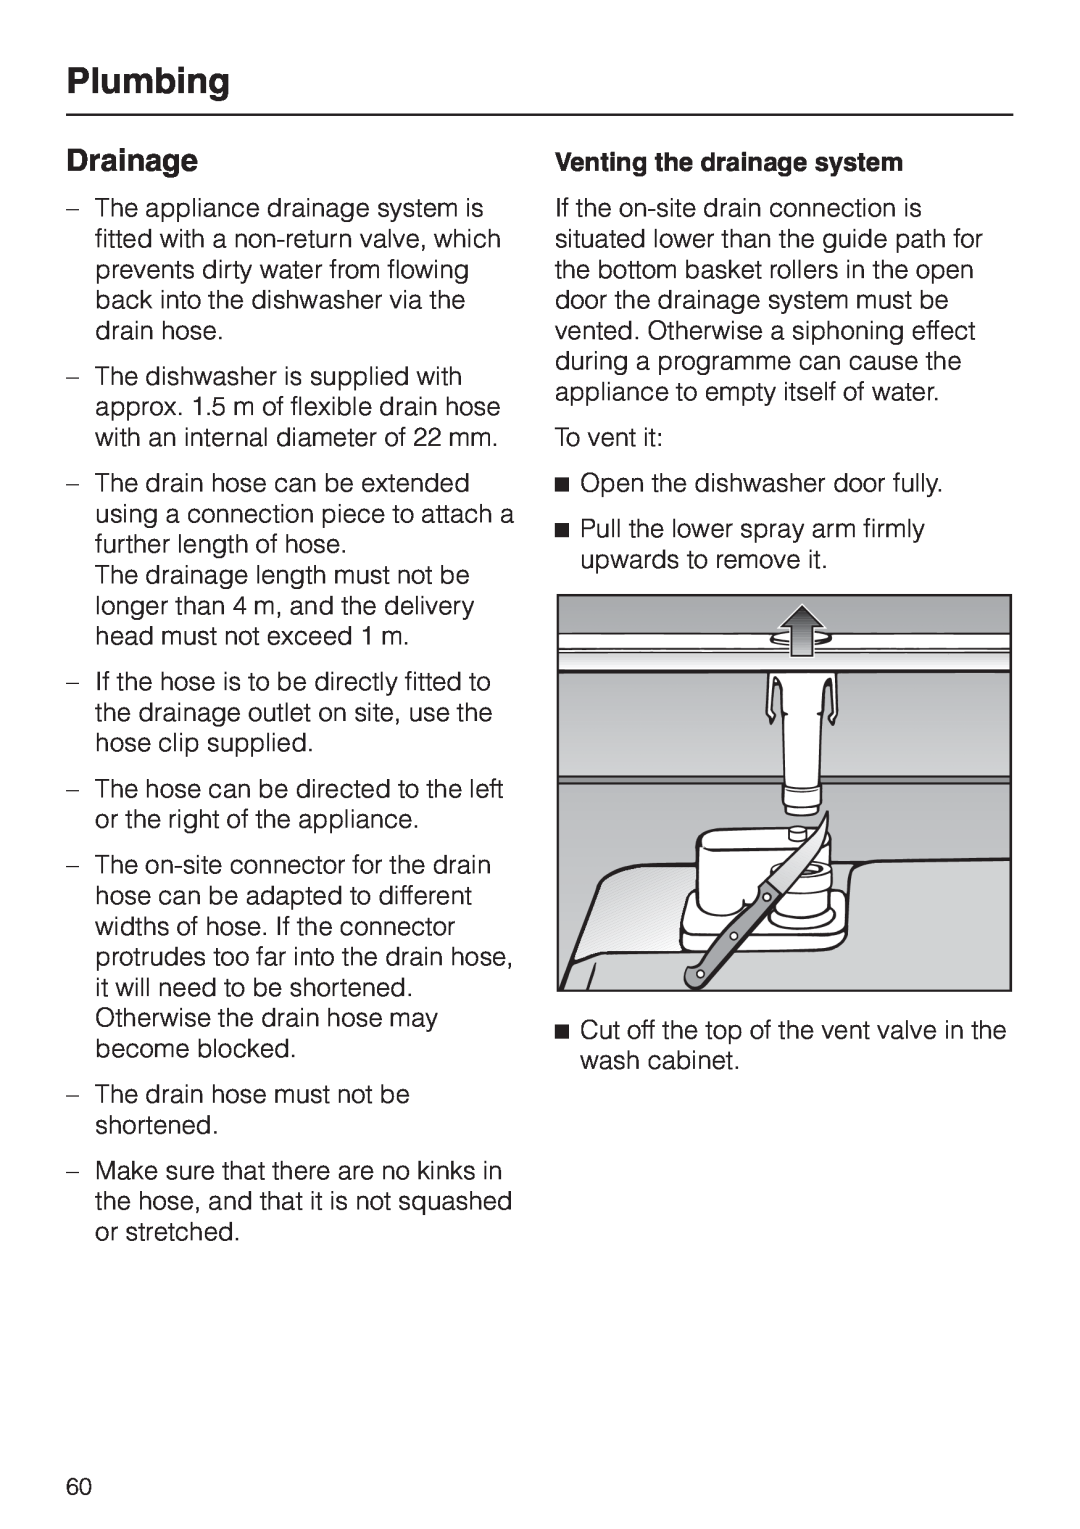 Miele 06 702 810 manual Drainage, Plumbing, Venting the drainage system 